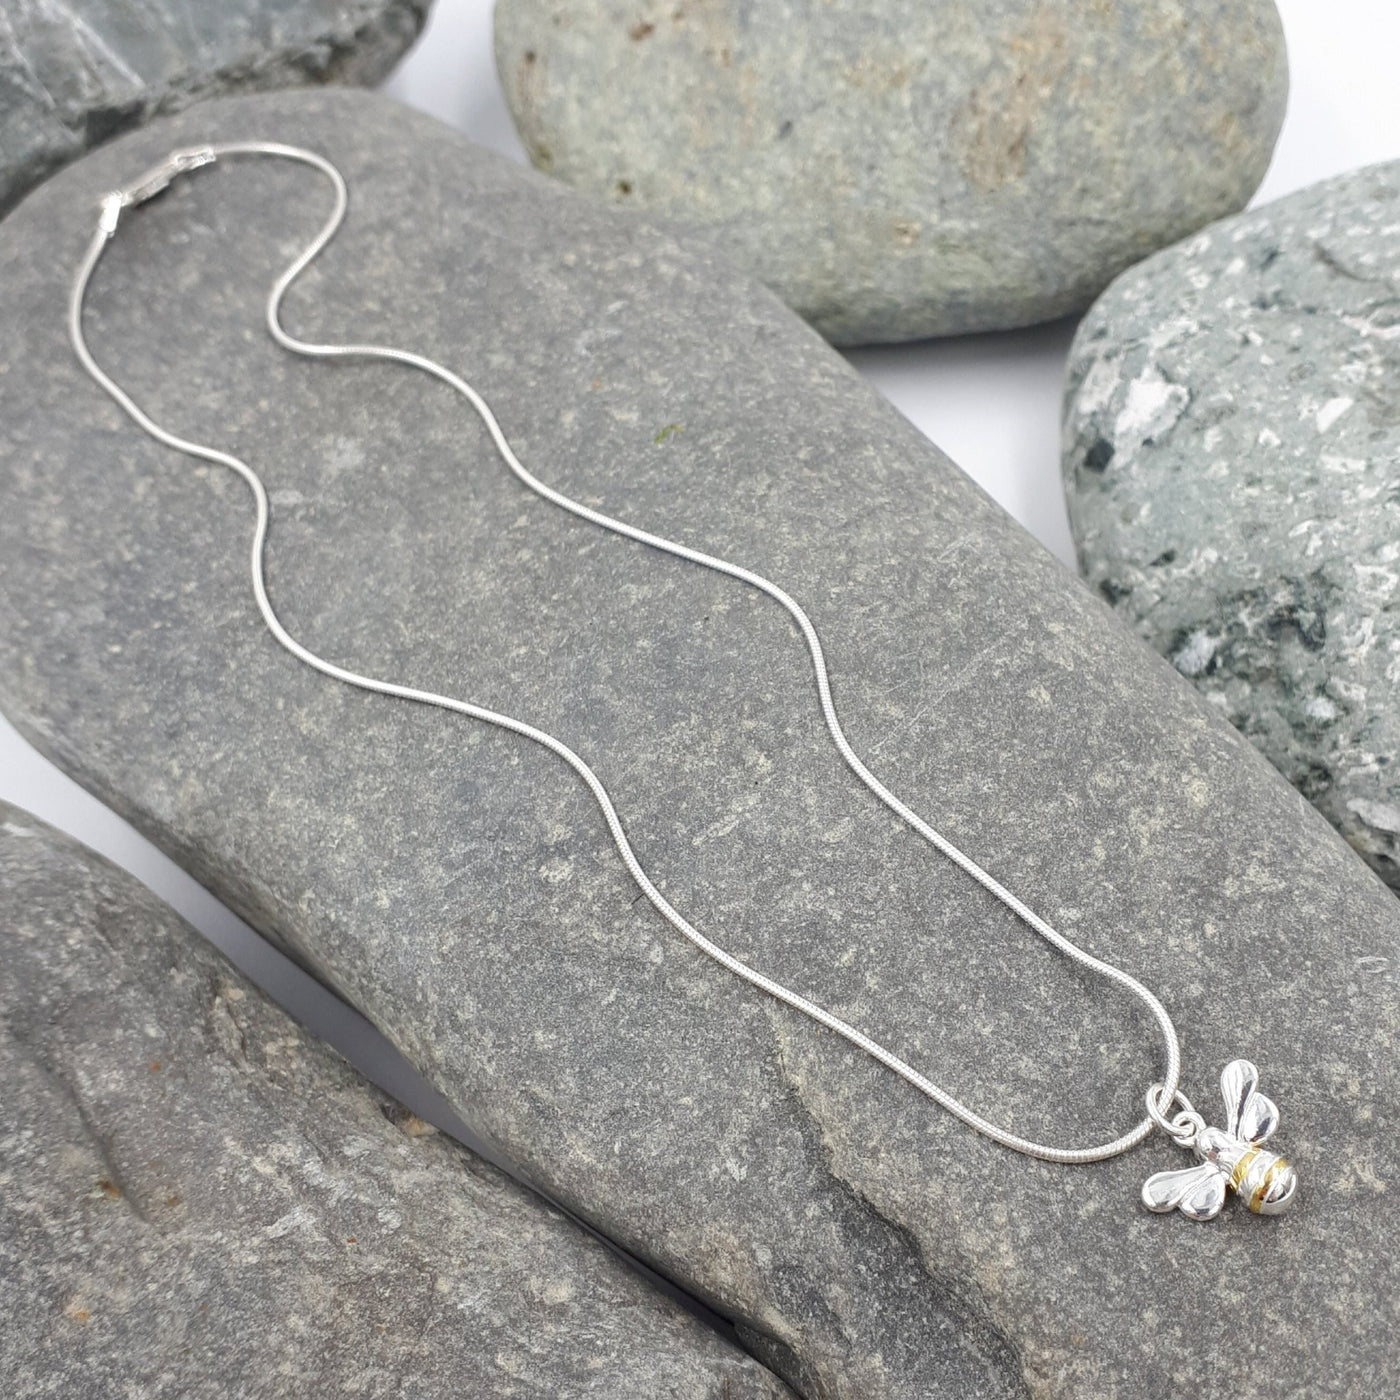 925 Sterling Silver Bumble Bee Necklace - JOANNE MASSEY ARTISAN JEWELLERY